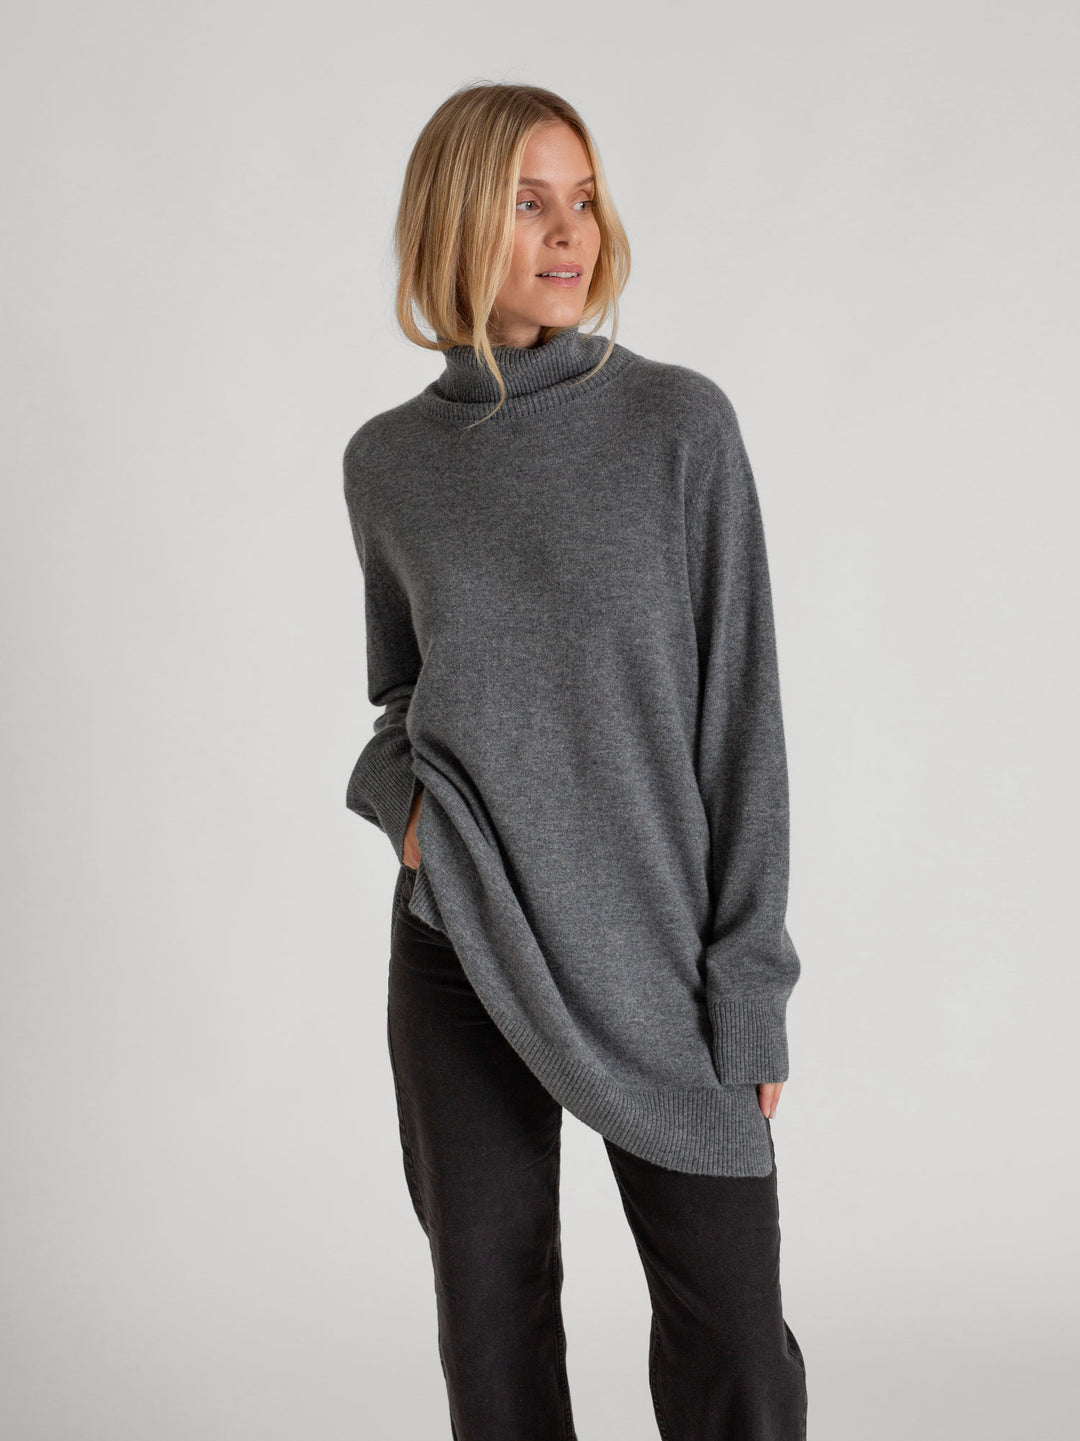 Long polo sweater in 100% pure cashmere. Scandinavian design by Kashmina. Color: Dark Grey.